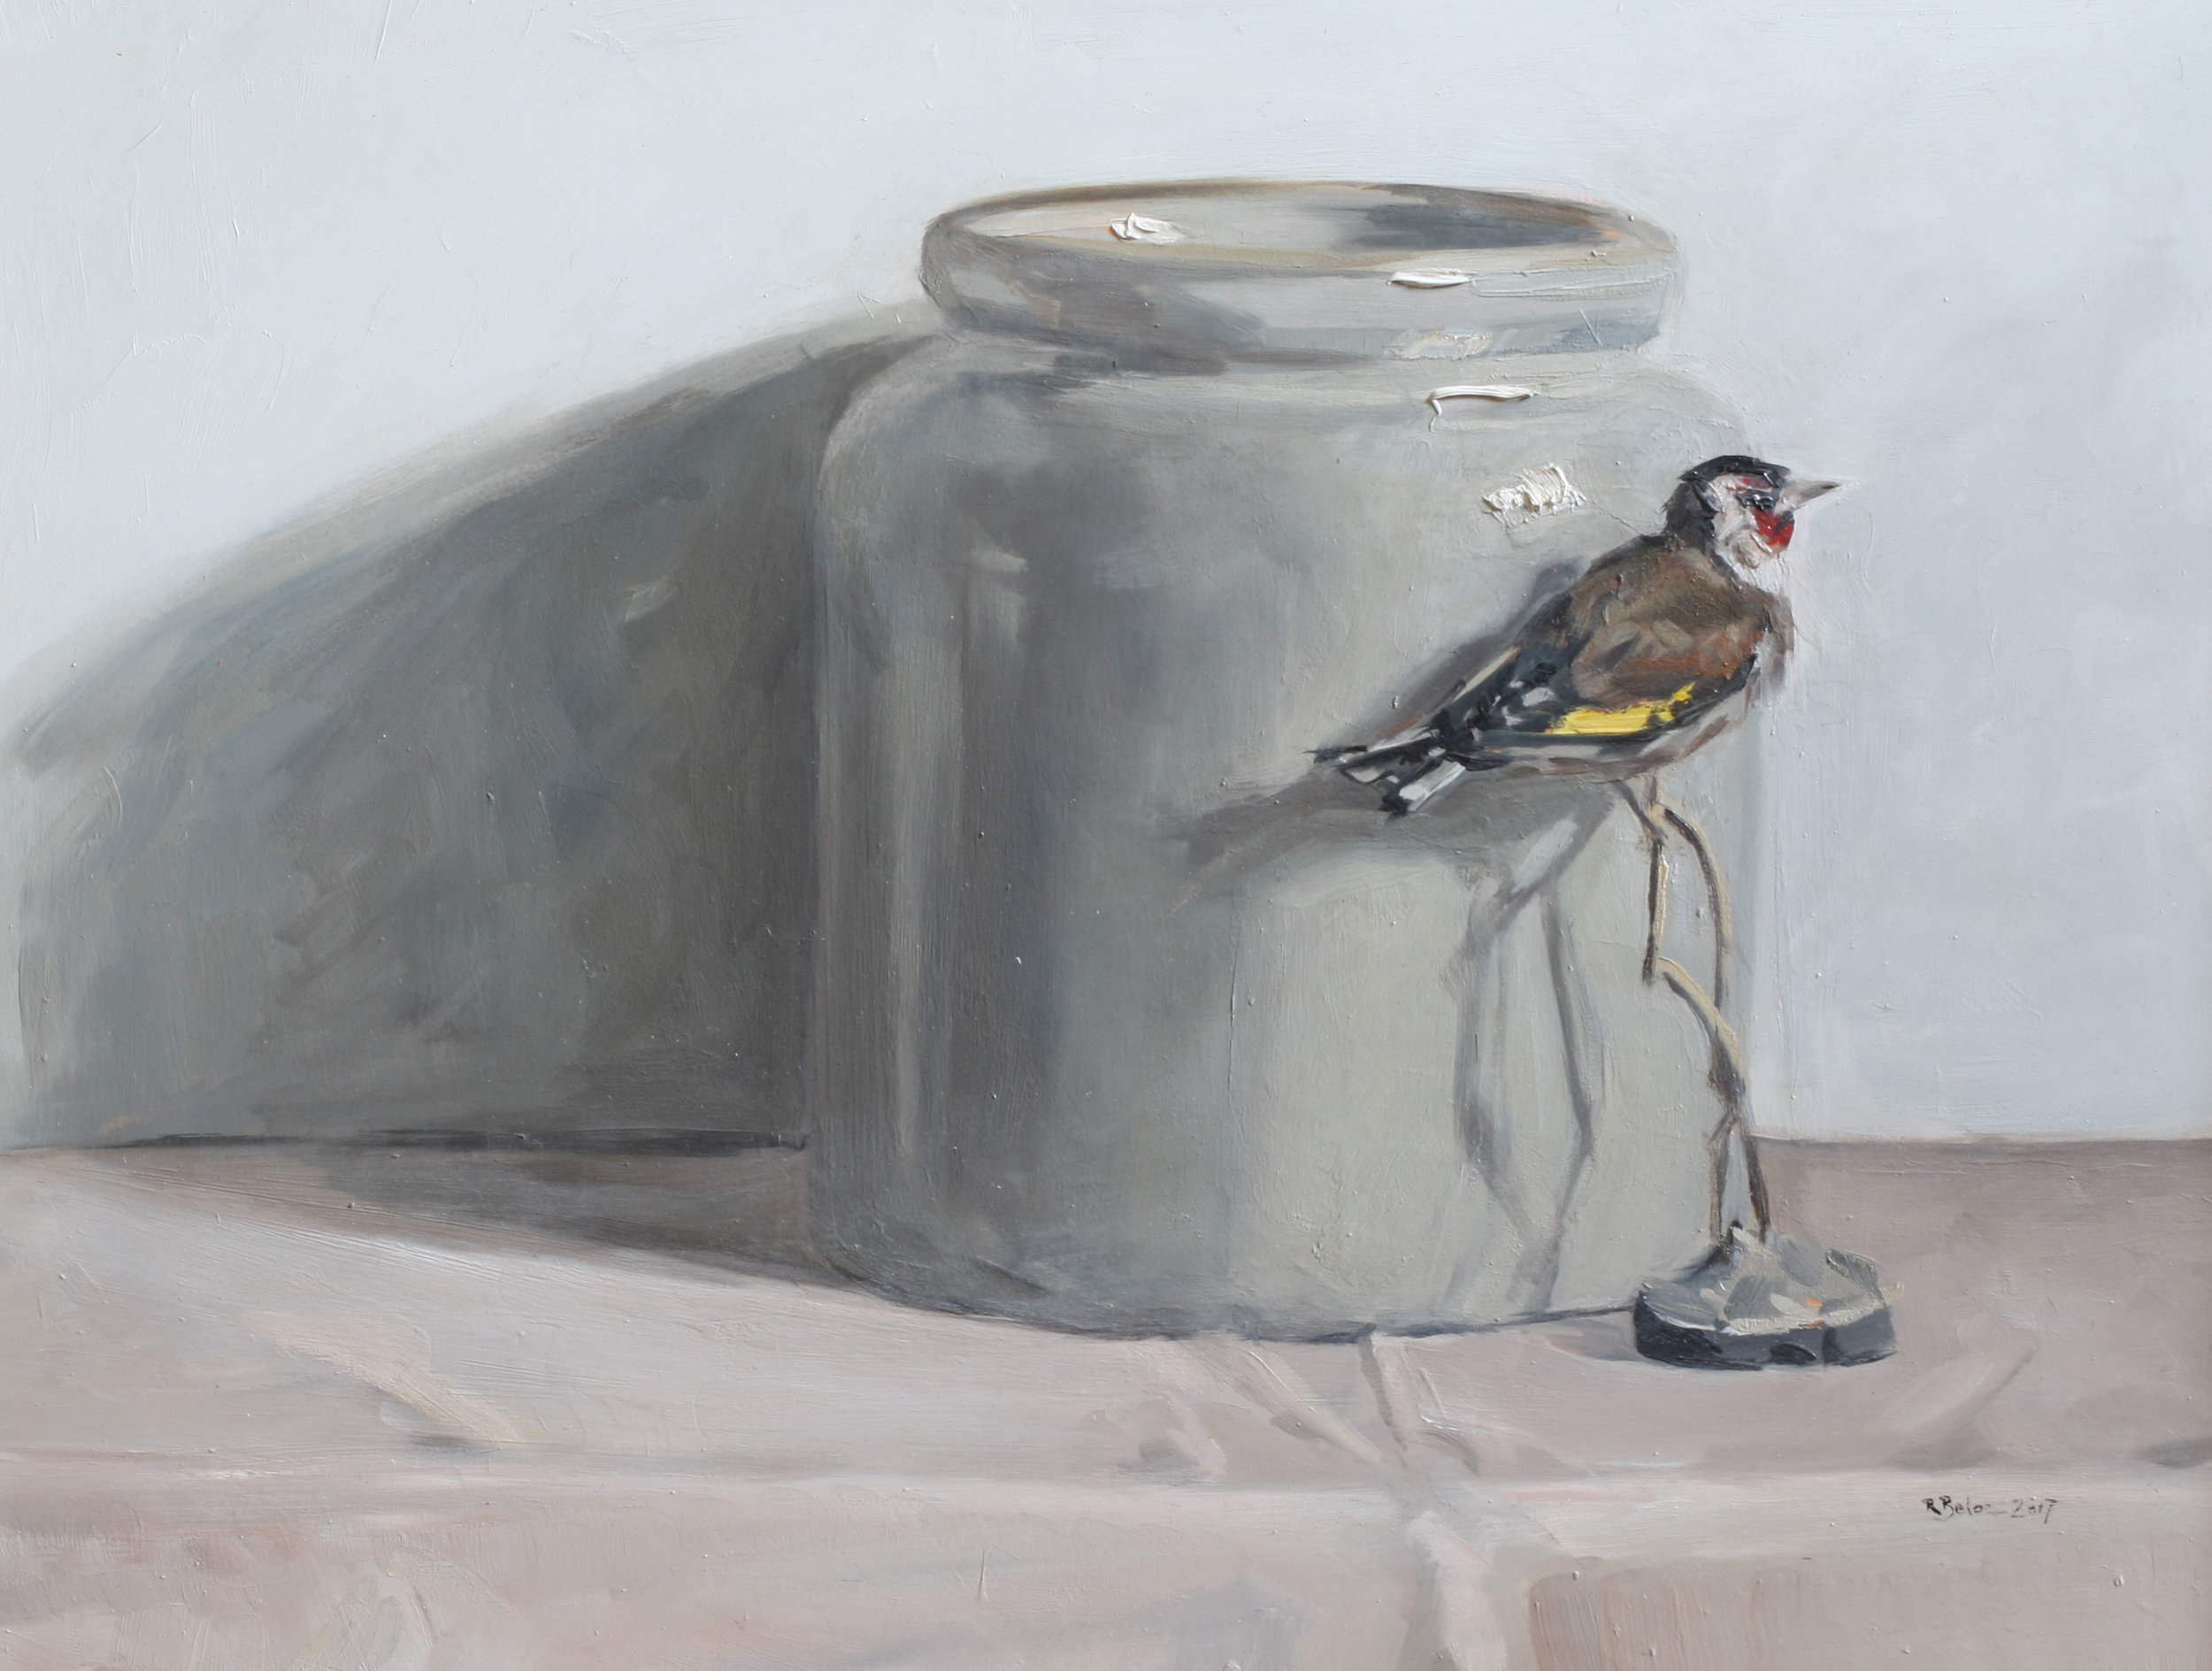 confit_pot_and_goldfinch.jpg